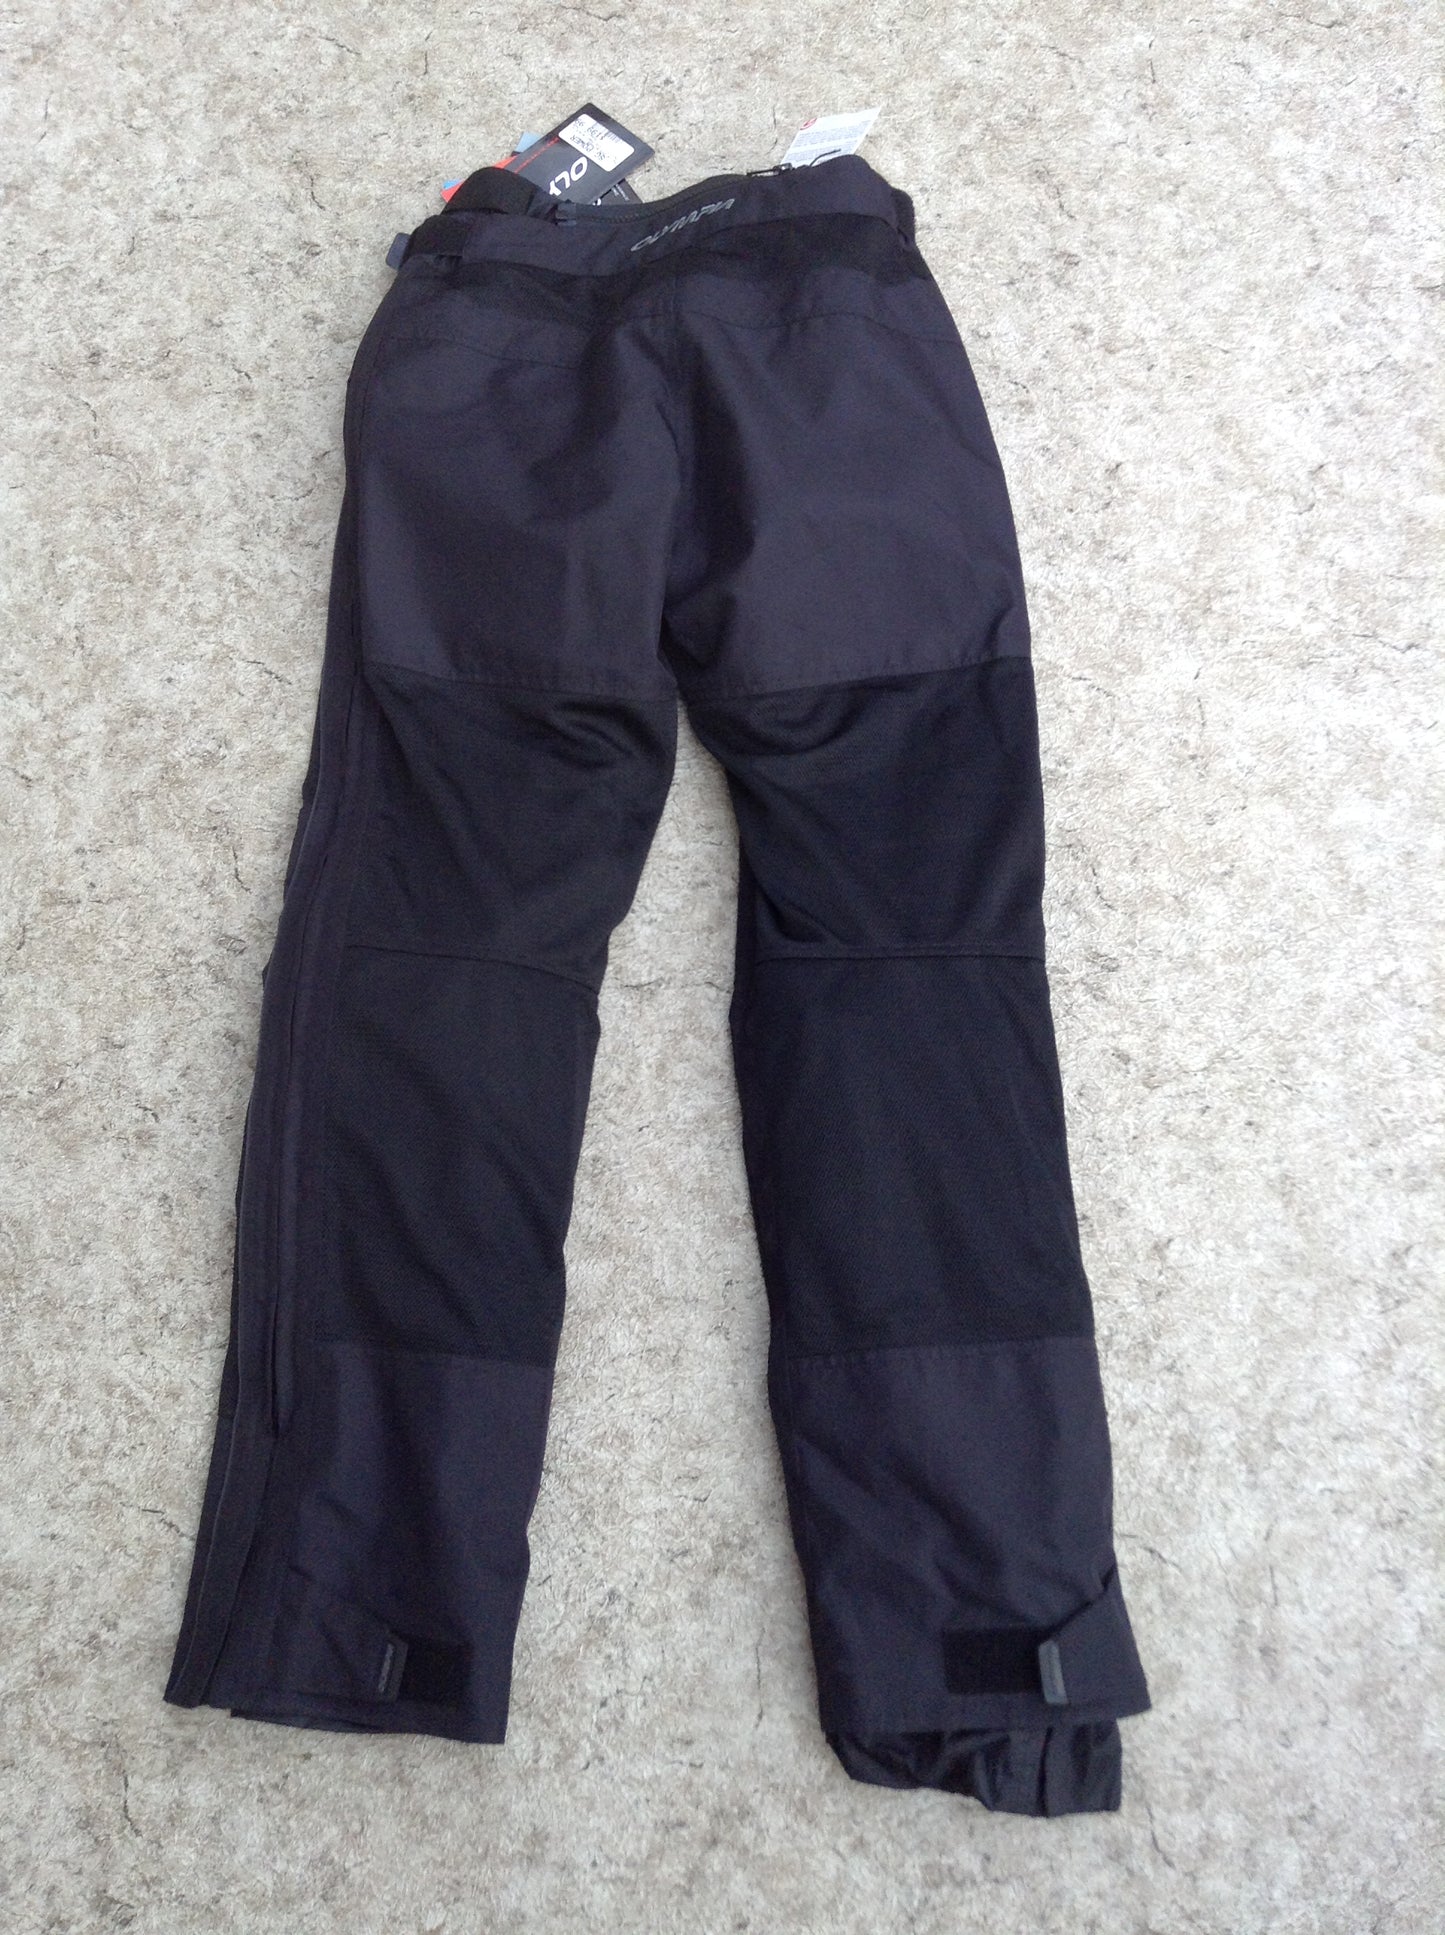 Motorcycle Armoured Doubled With Rain Pants Attached Inside Can Be worn Outside Ladies Size 8 Olympia 2 in 1 NEW With Tags